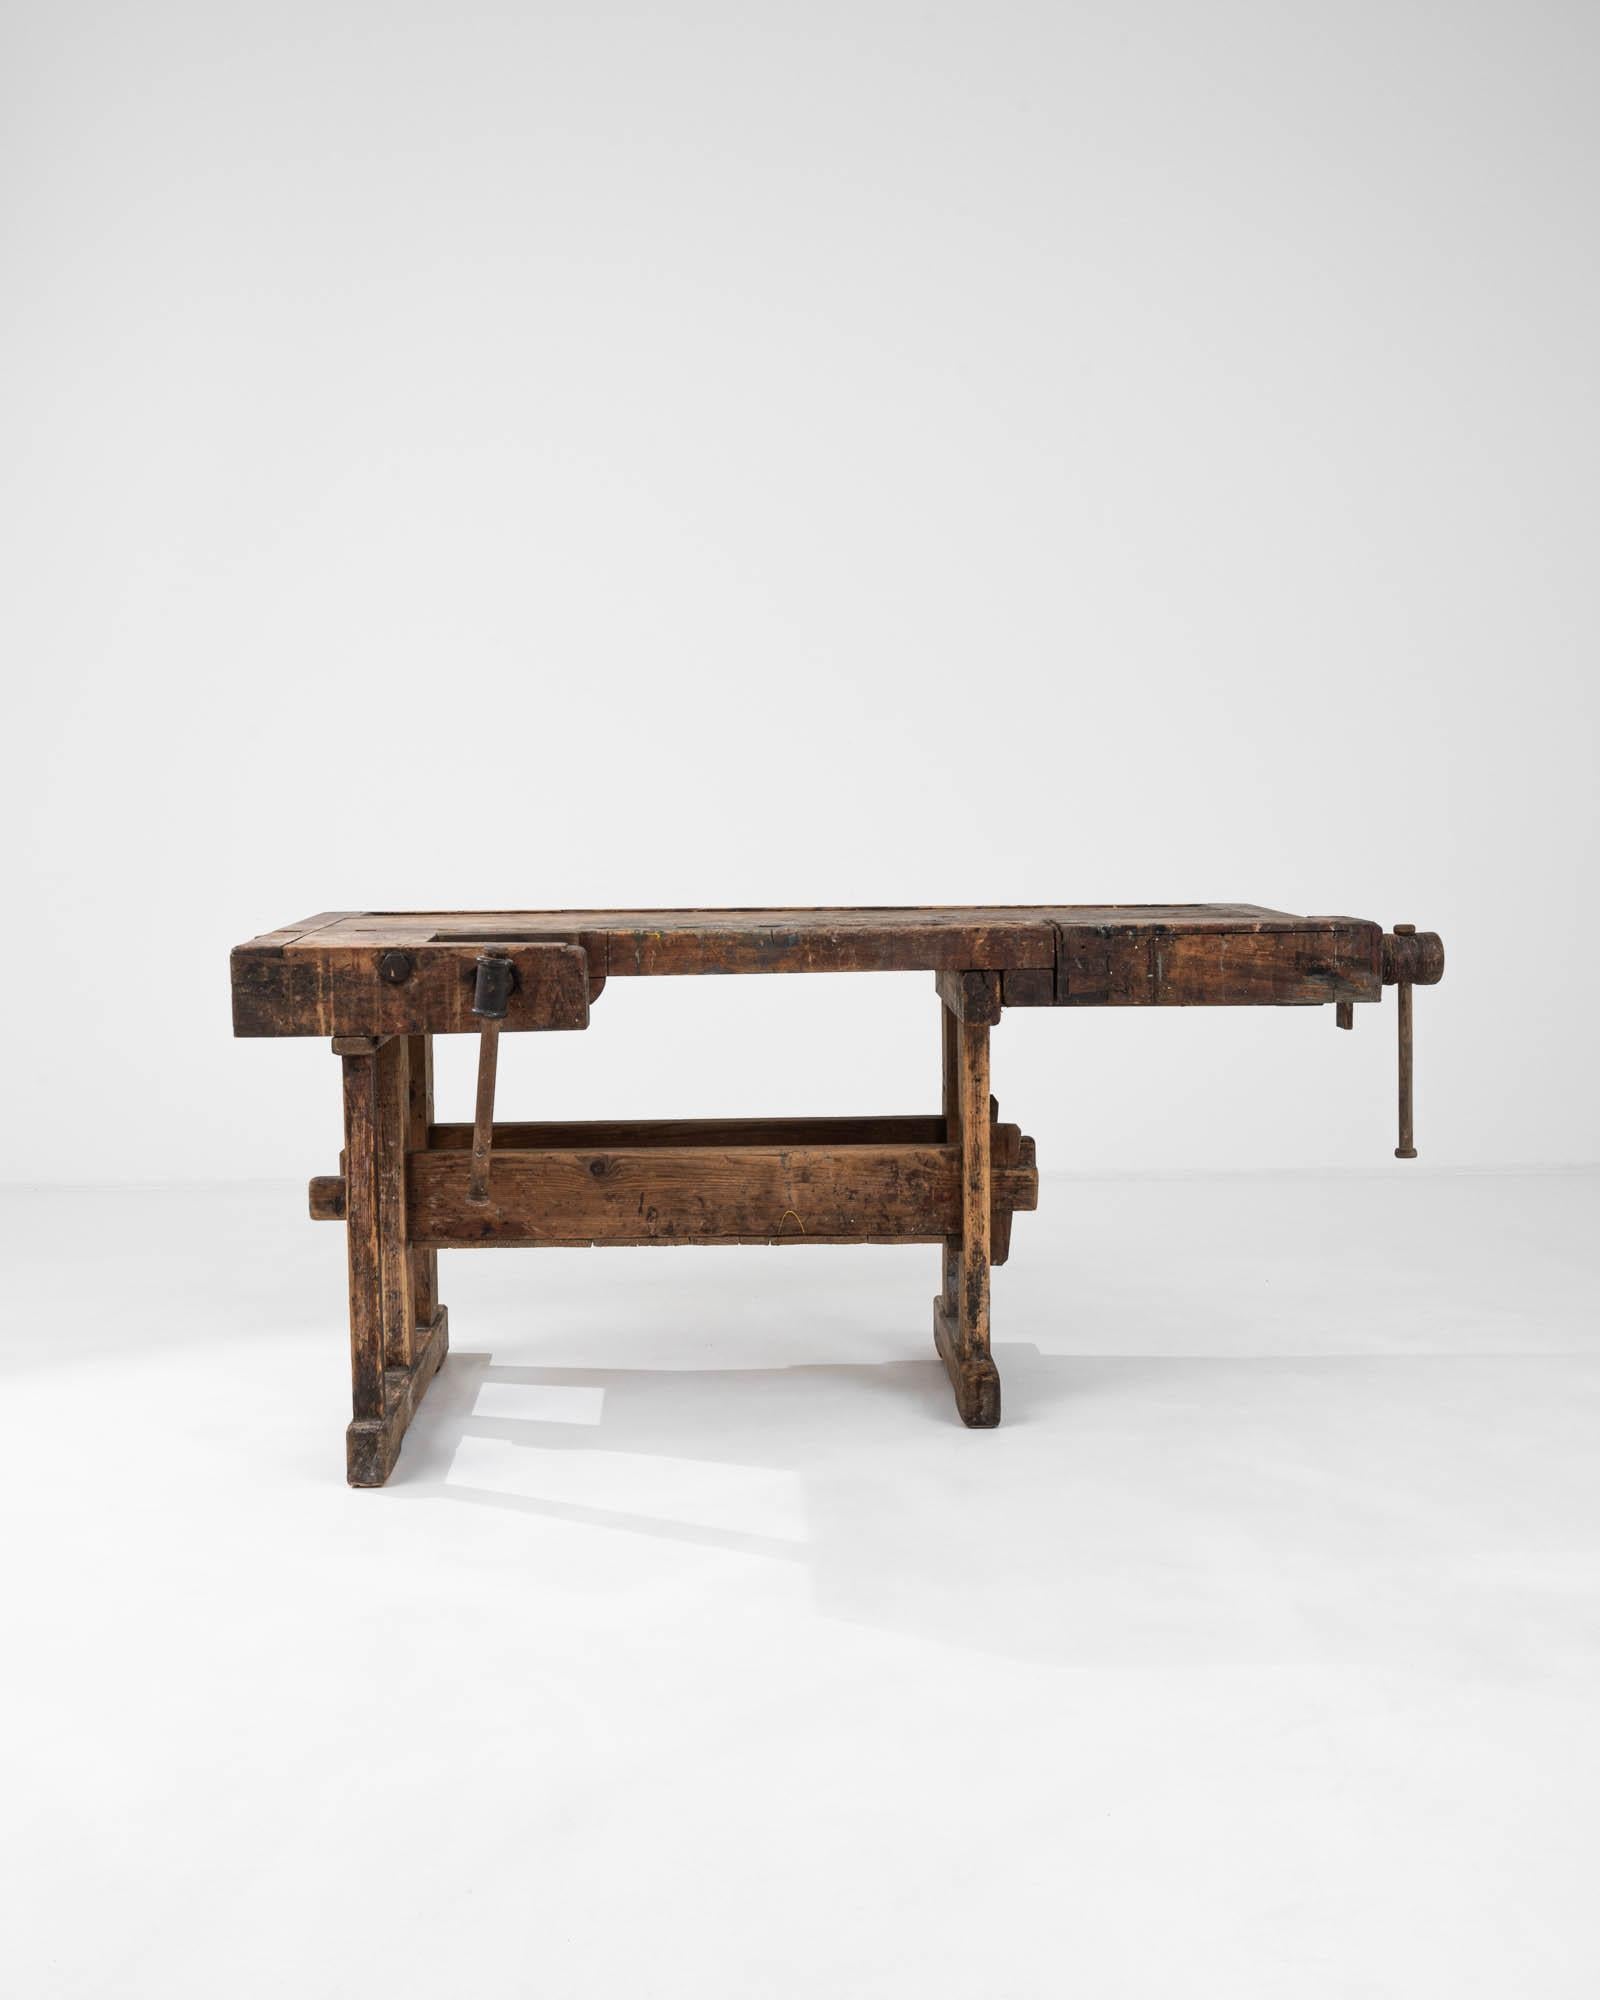 This 20th Century Belgian Wooden Work Table is a testament to the enduring strength and rugged beauty of traditional craftsmanship. Constructed from solid wood, this work table exudes a robust character with its well-worn surface and visible tool